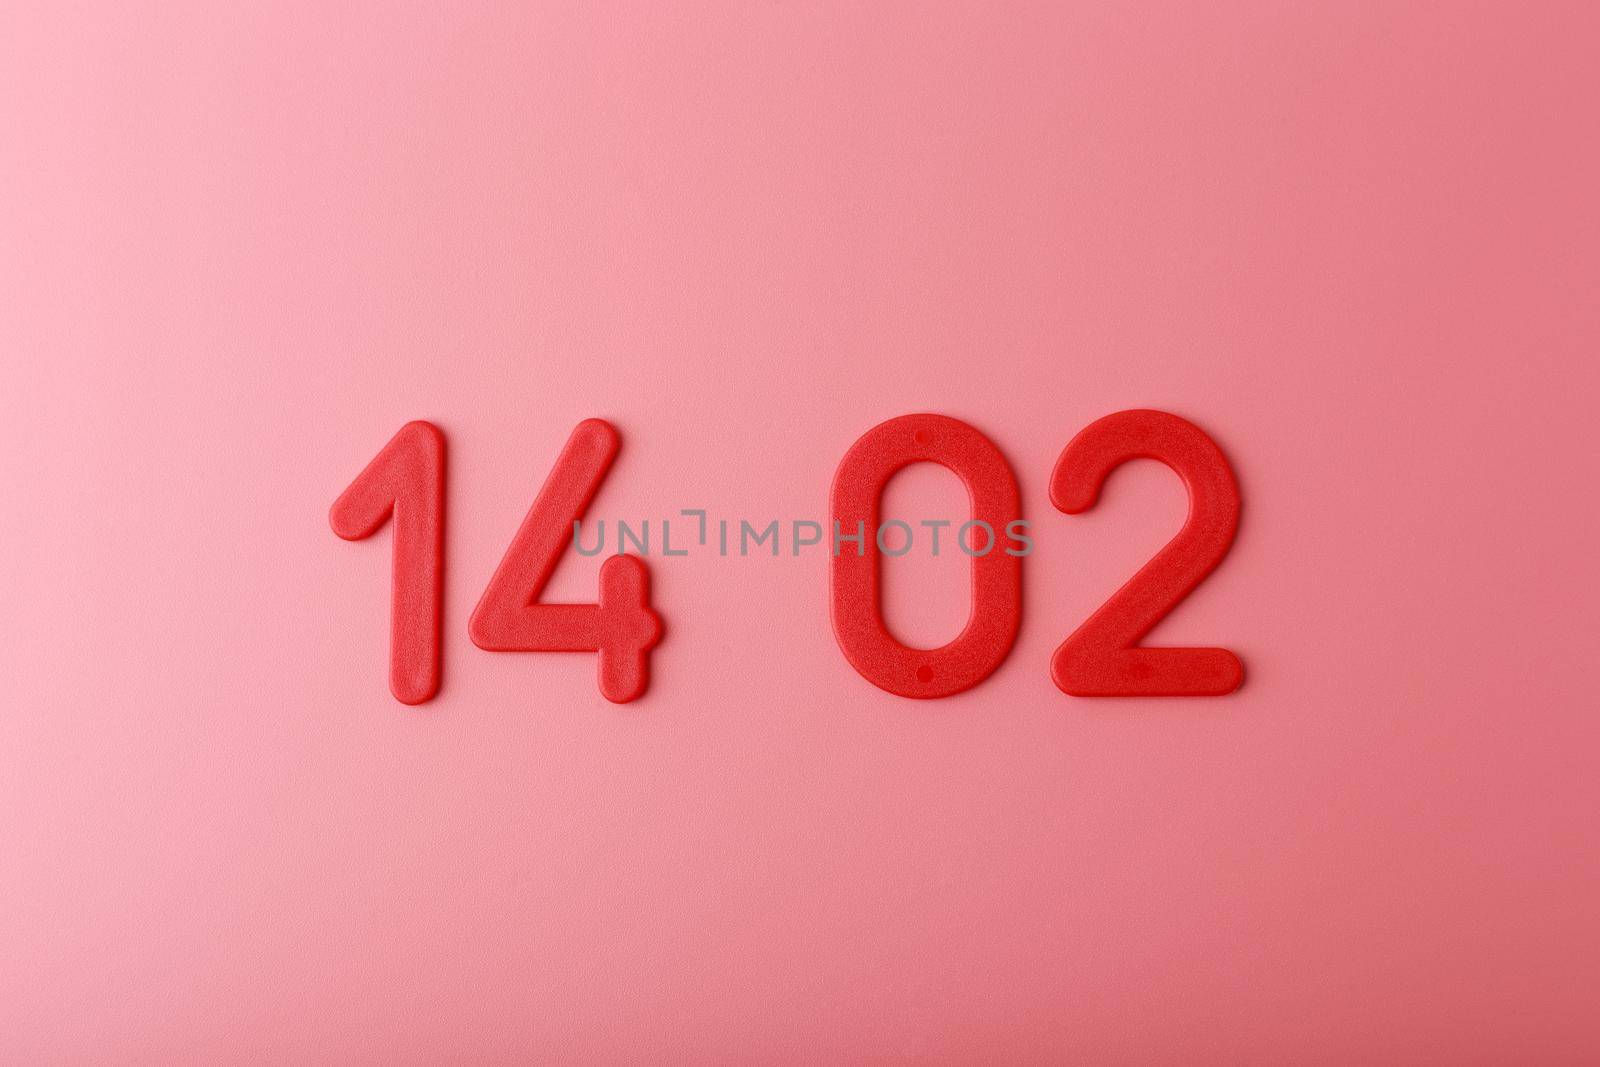 Top view of red plastic numbers 14 02 on bright pink background. Concept of Happy Valentine's day . High quality photo